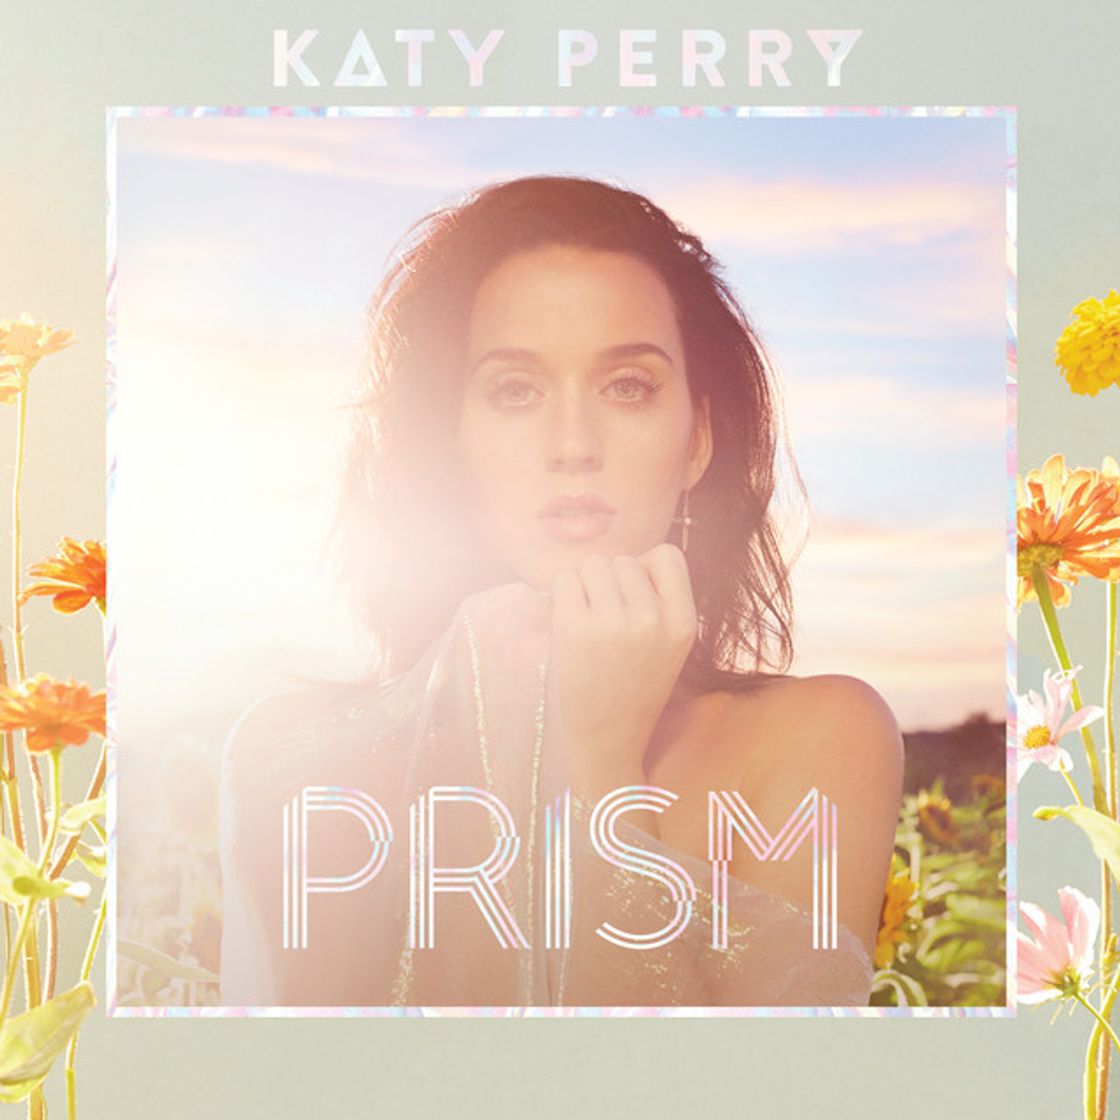 Unconditionally Katy Perry — PRISM (Deluxe)